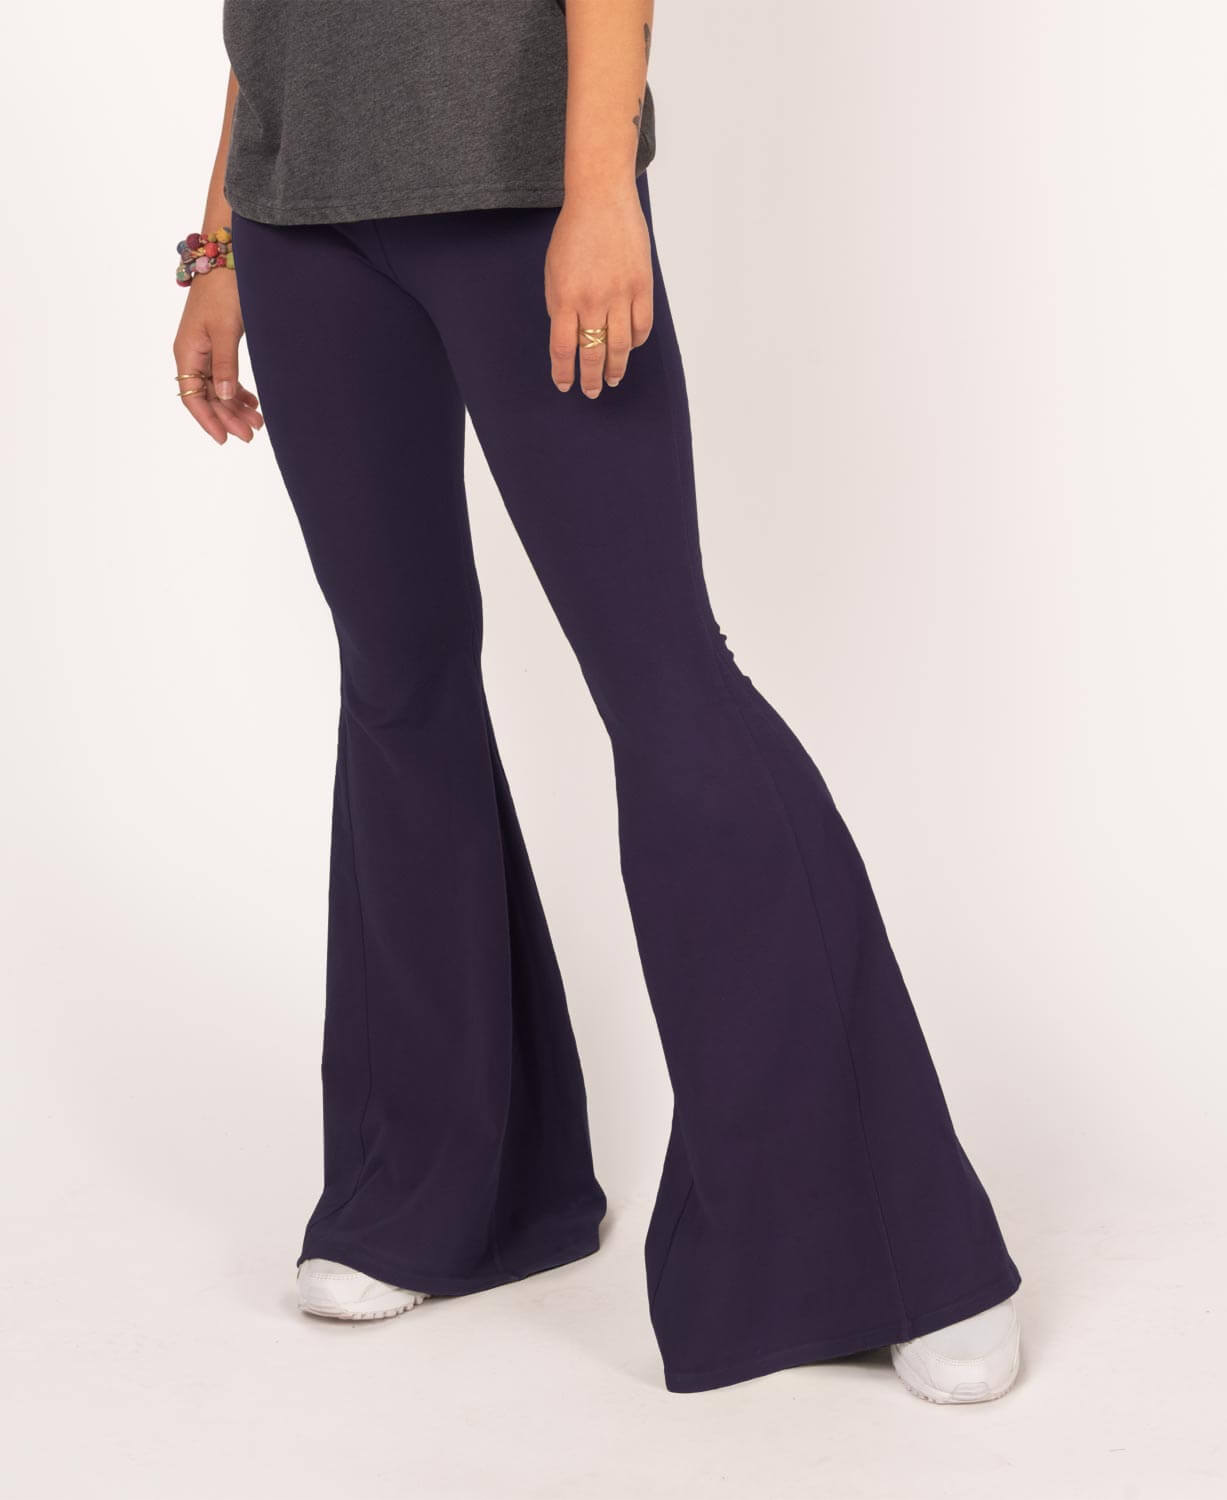 Stretchy Flare Pants